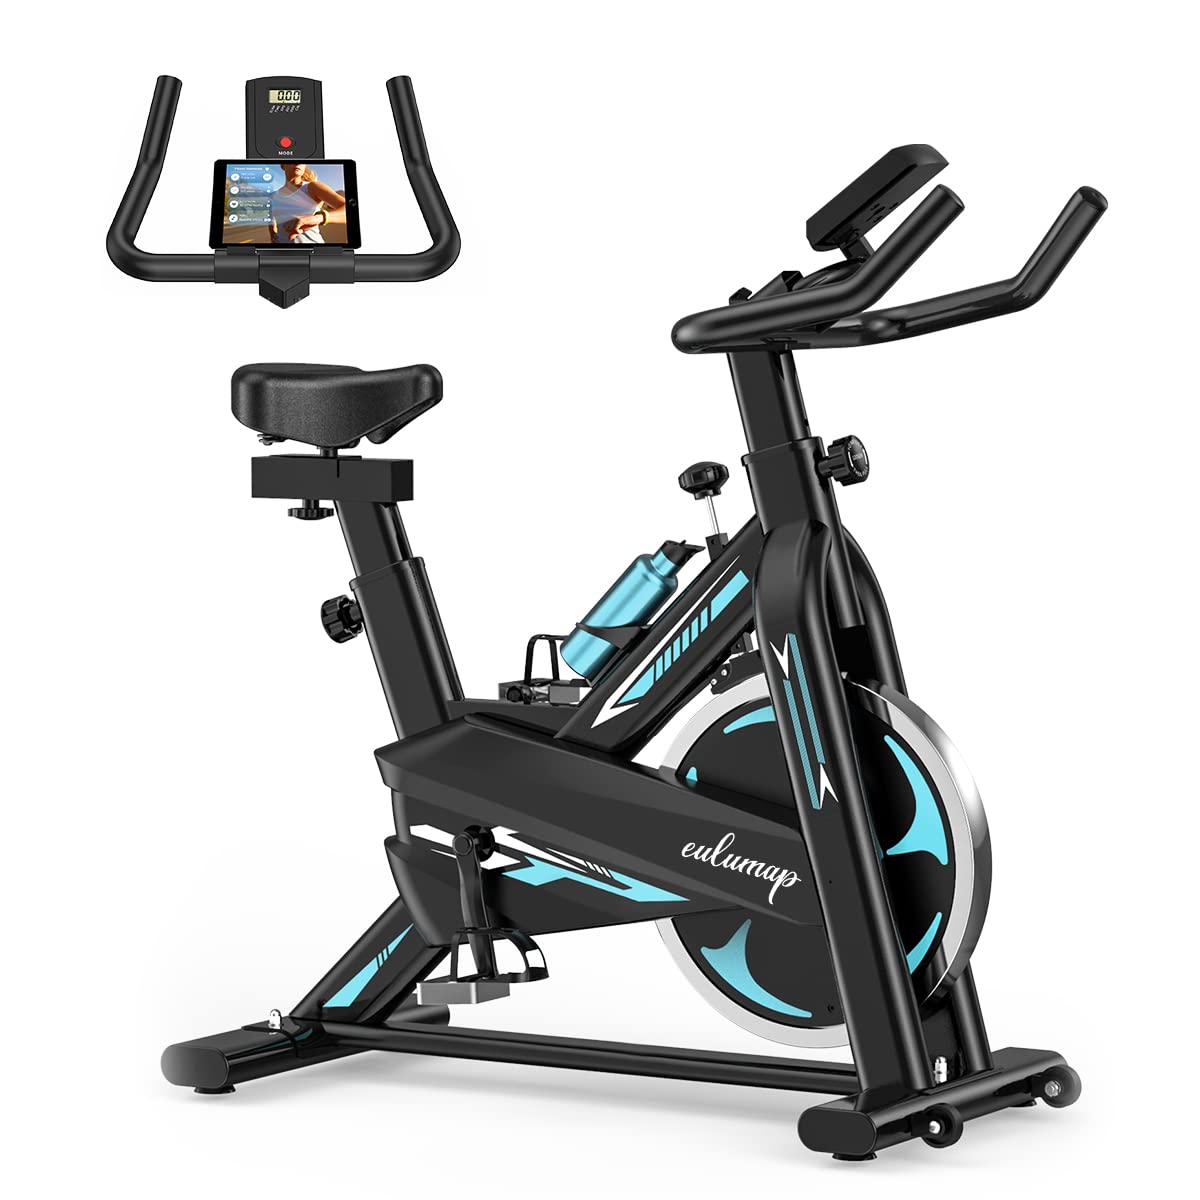 Review of the Eulumap Exercise Bike